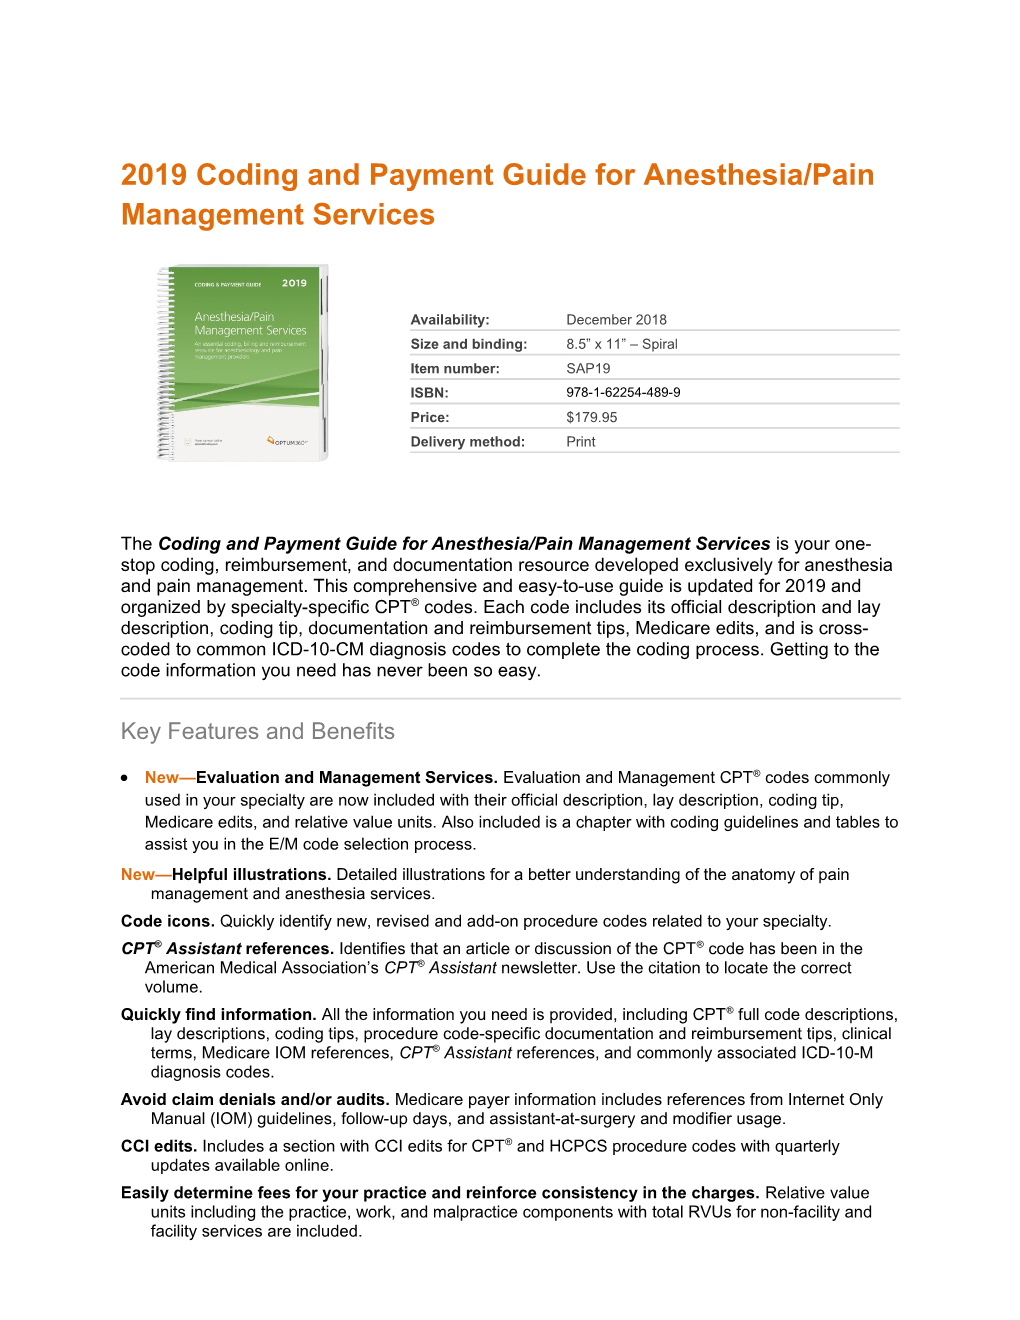 2019 Coding and Payment Guide for Anesthesia/Pain Management Services